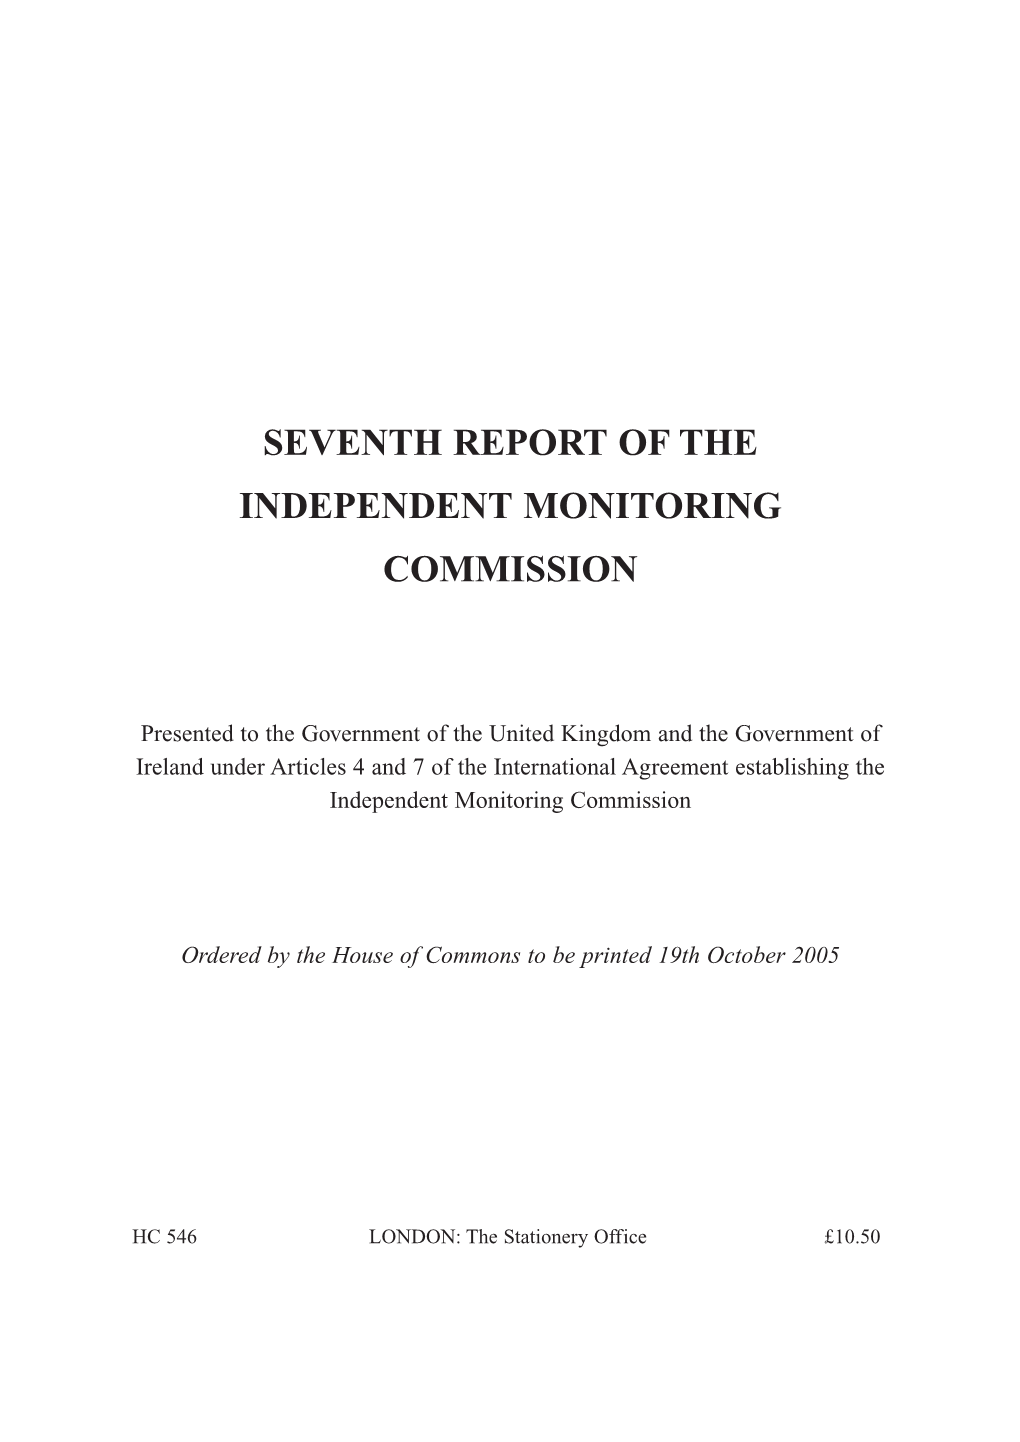 Seventh Report of the Independent Monitoring Commission